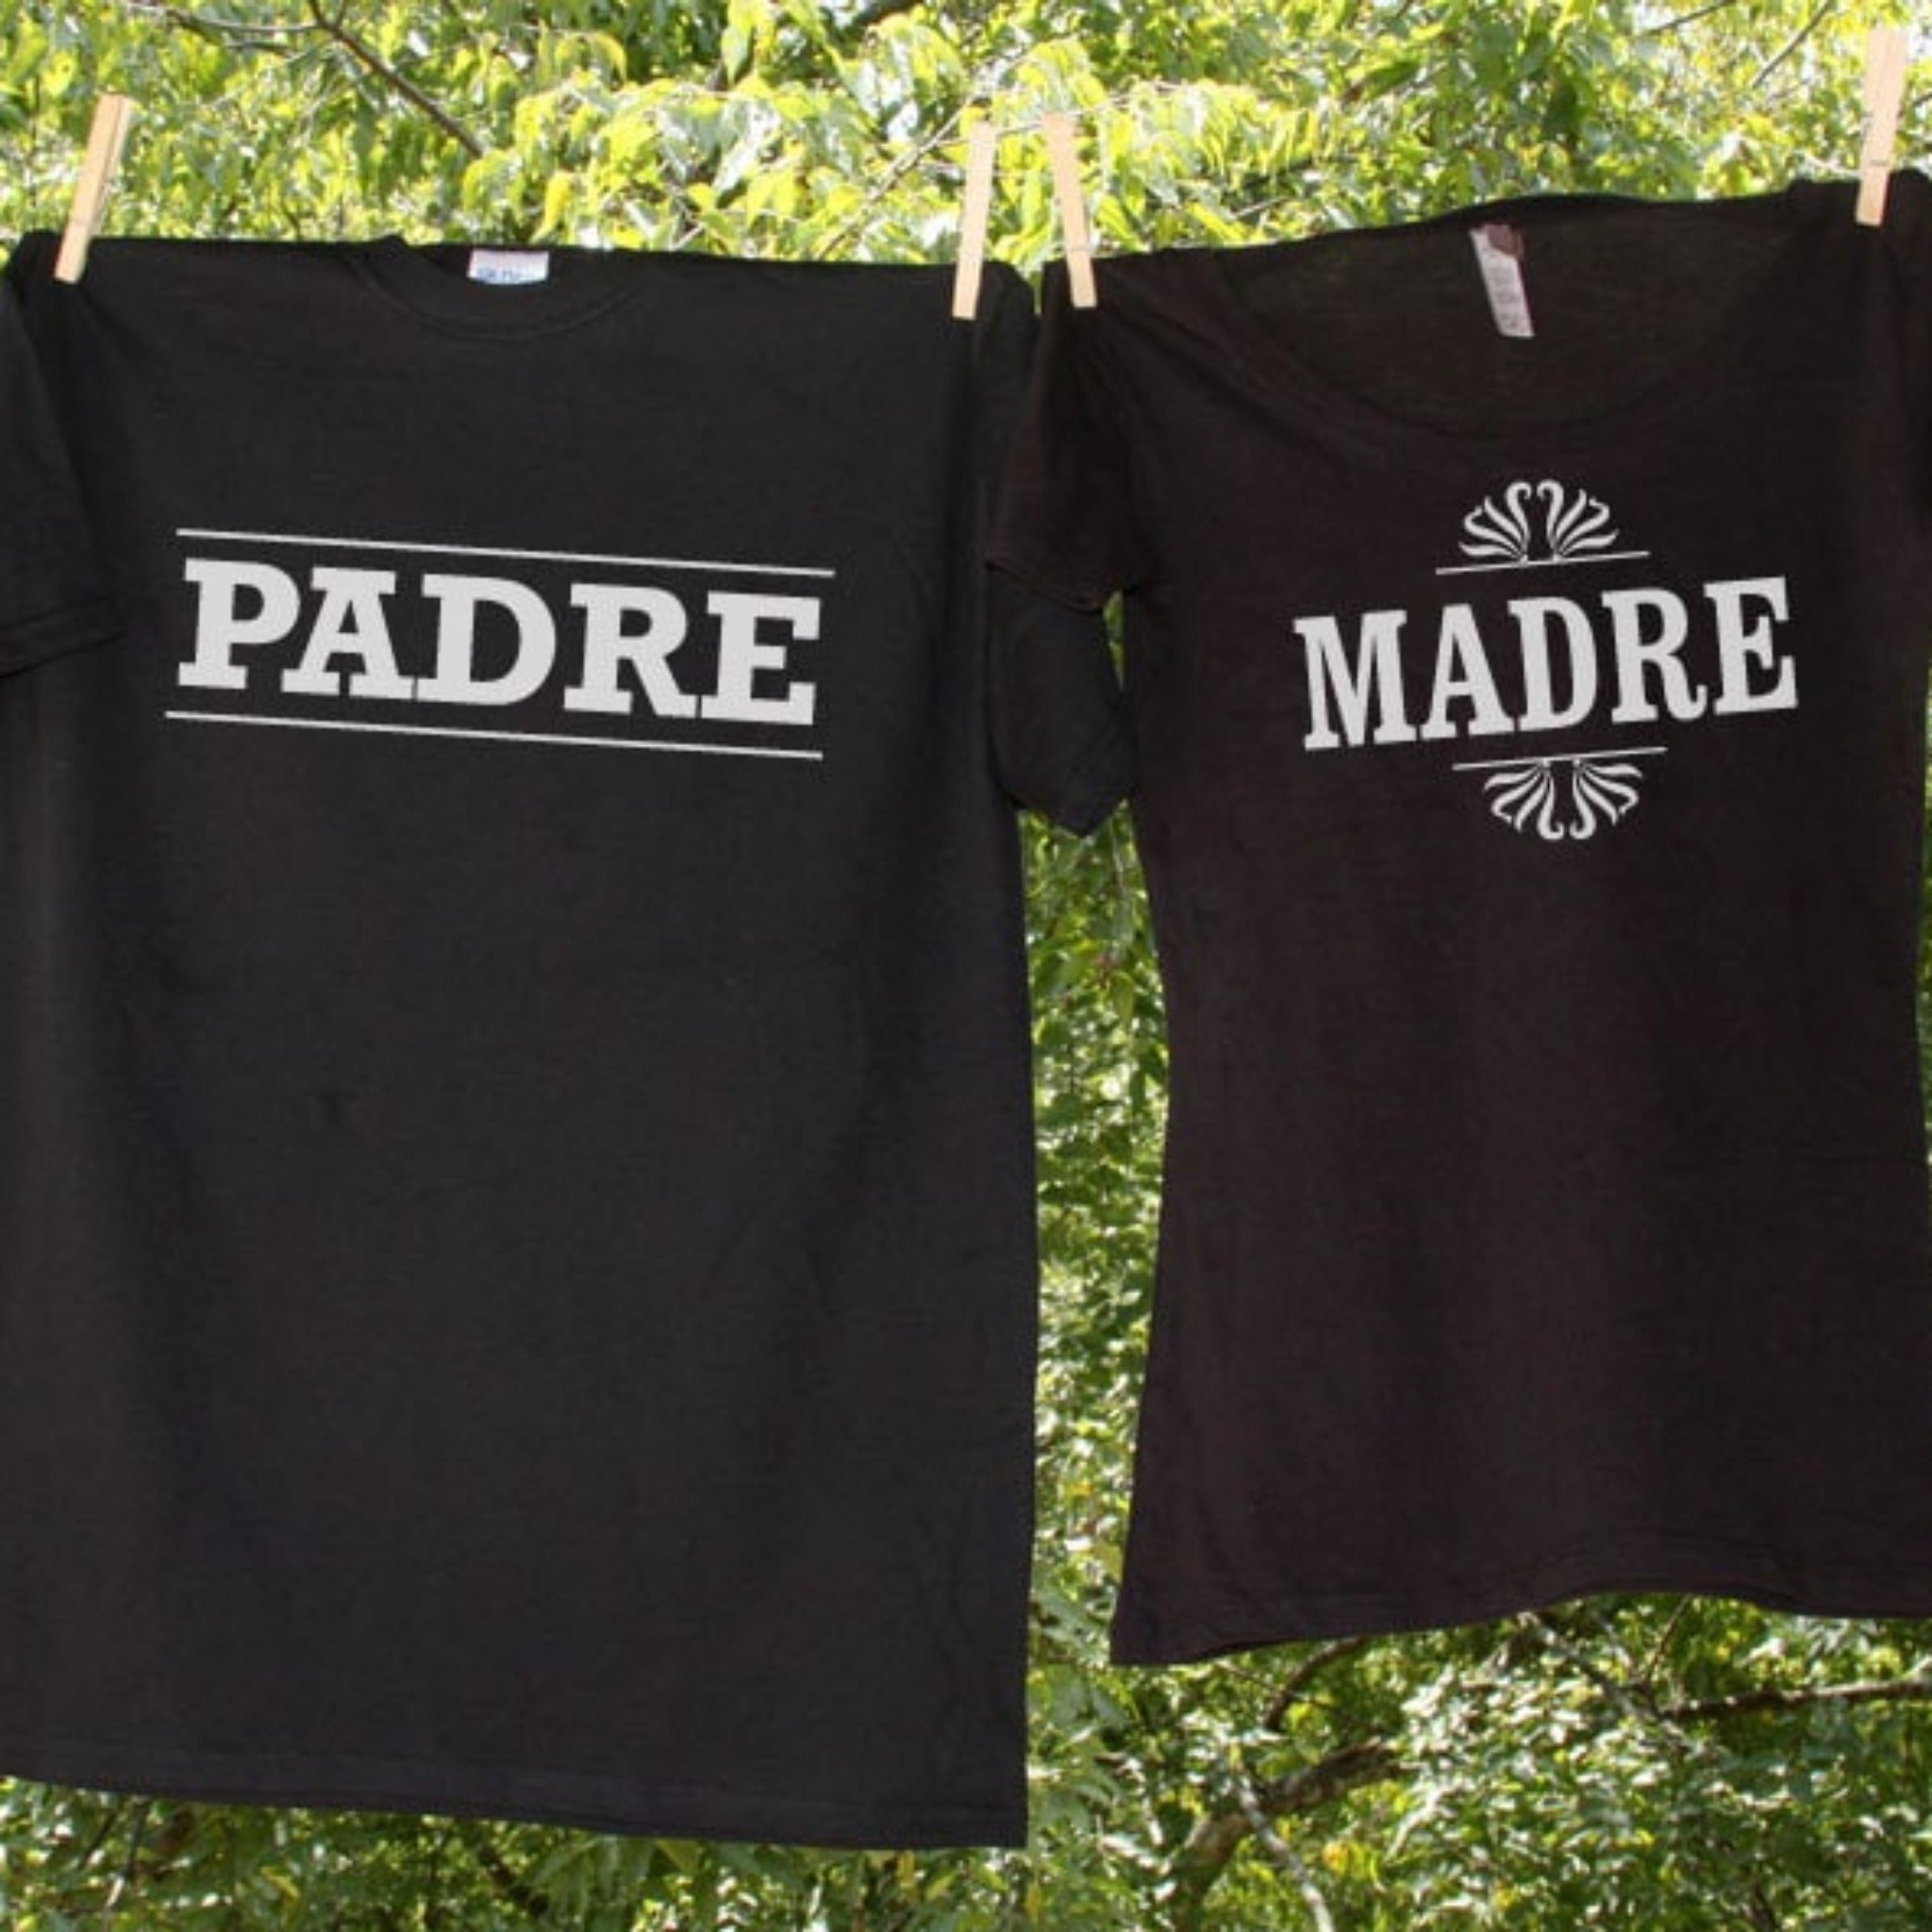 Madre Padre Mexican Fiesta or Gender Reveal Party Shirts - Set of 2